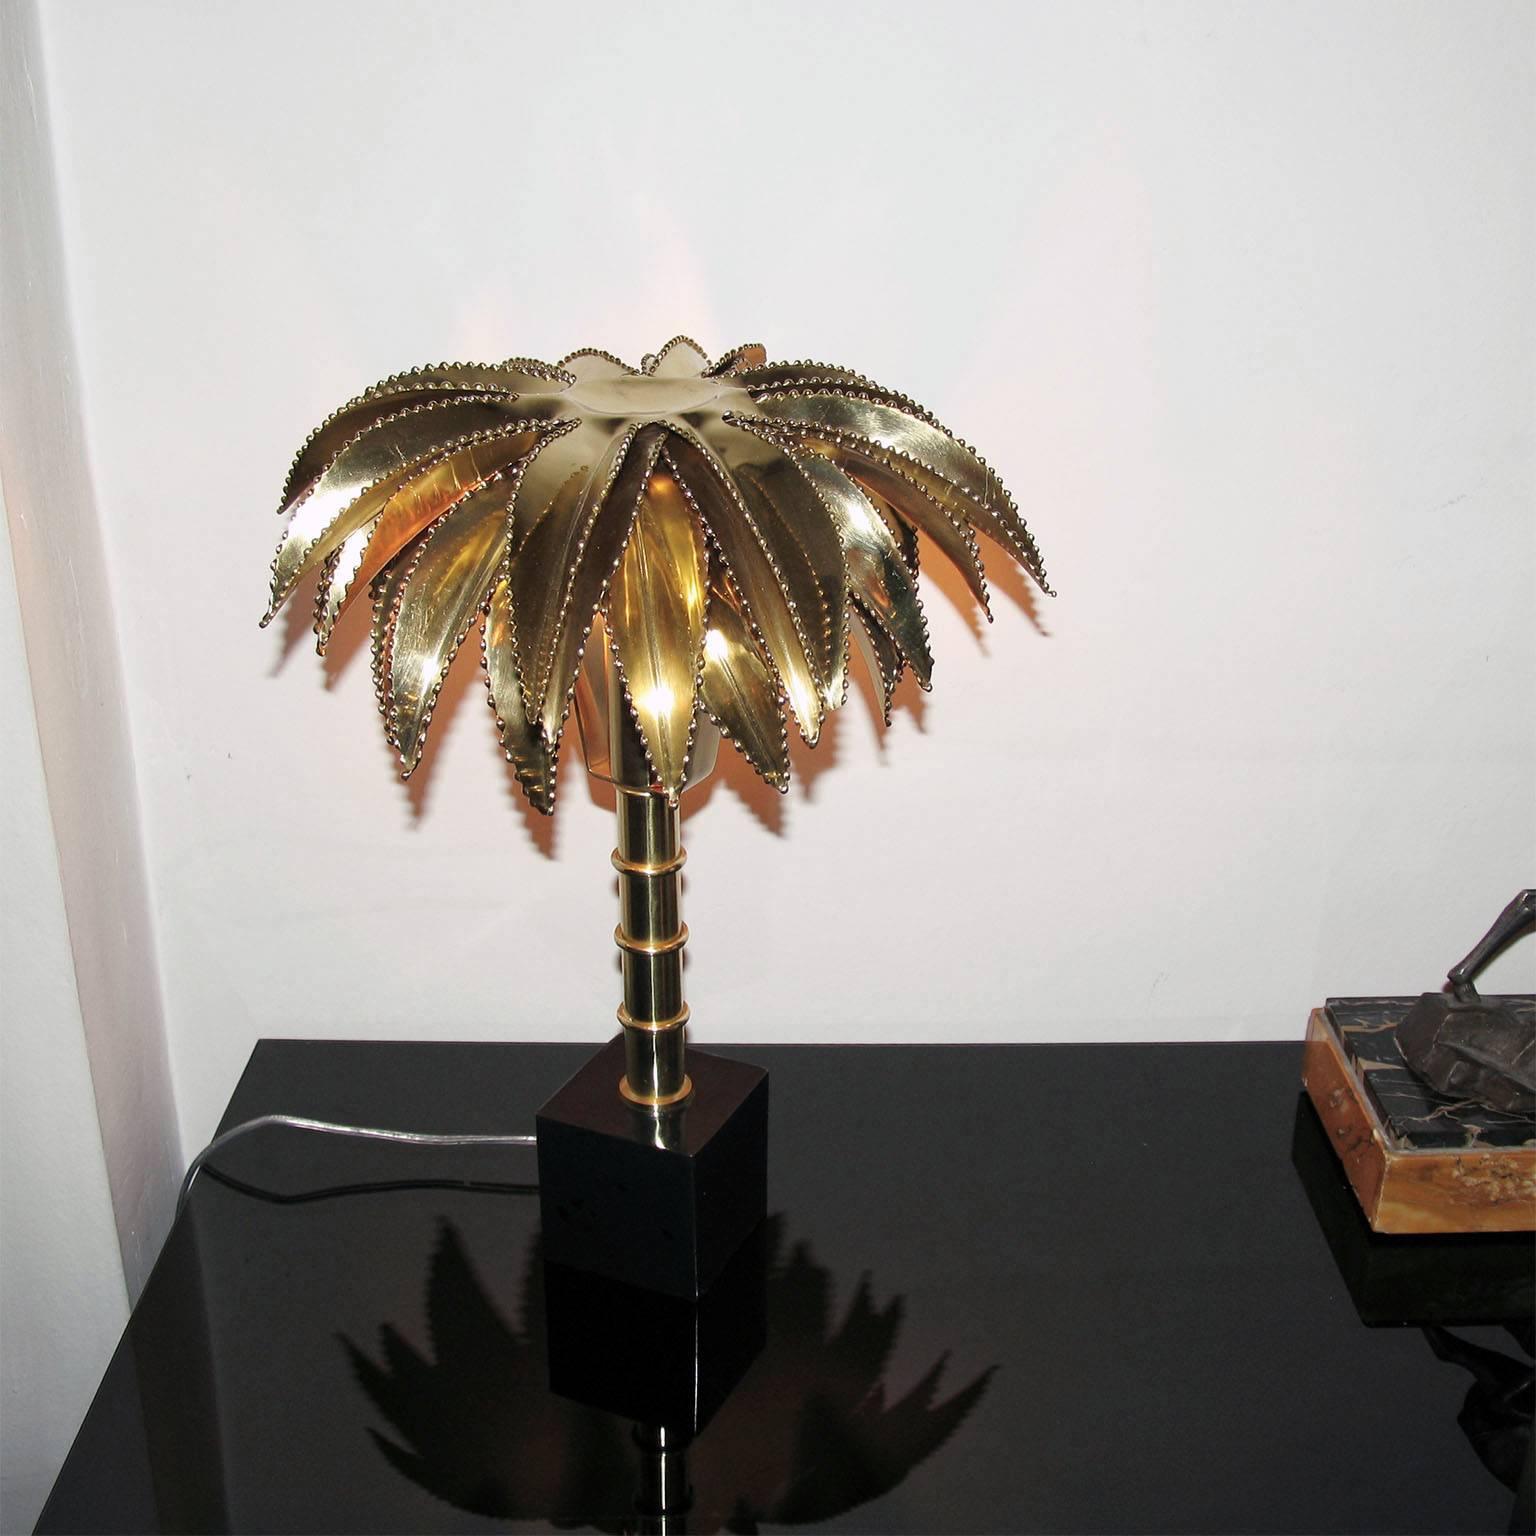 An exquisite table lamp in the style of Maison Jansen, shaped like a palm tree.
Entirely handmade of brass with a black box metal base. Very decorative yet functional, this lamp can be an eye catcher wherever you place it, creating a glamorous look